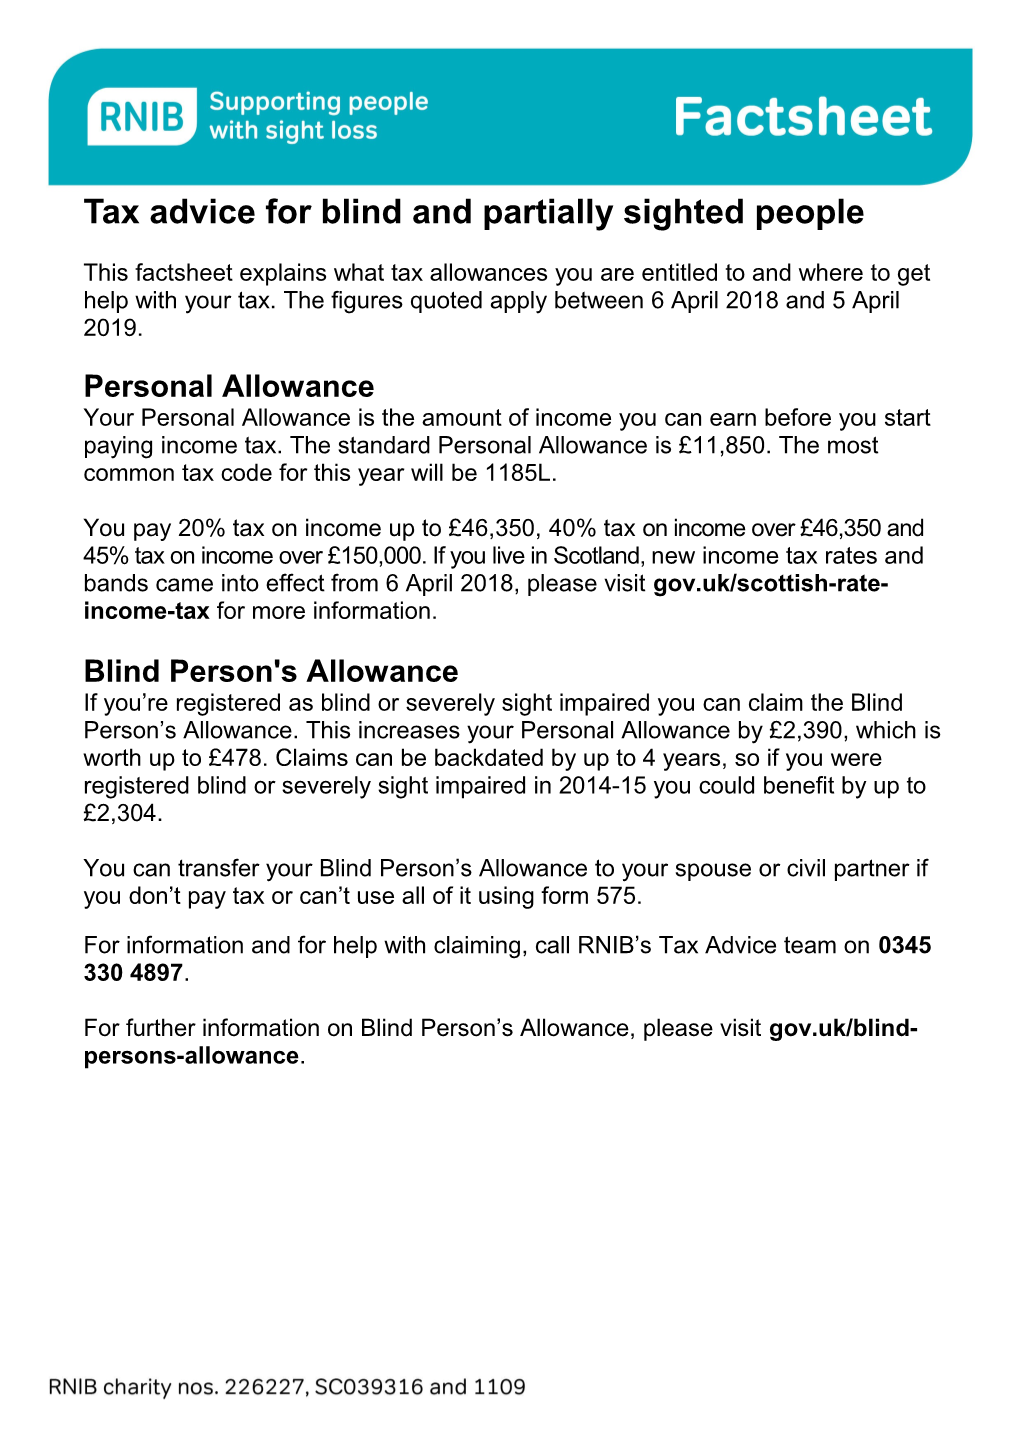 Tax Advice for Blind and Partially Sighted People